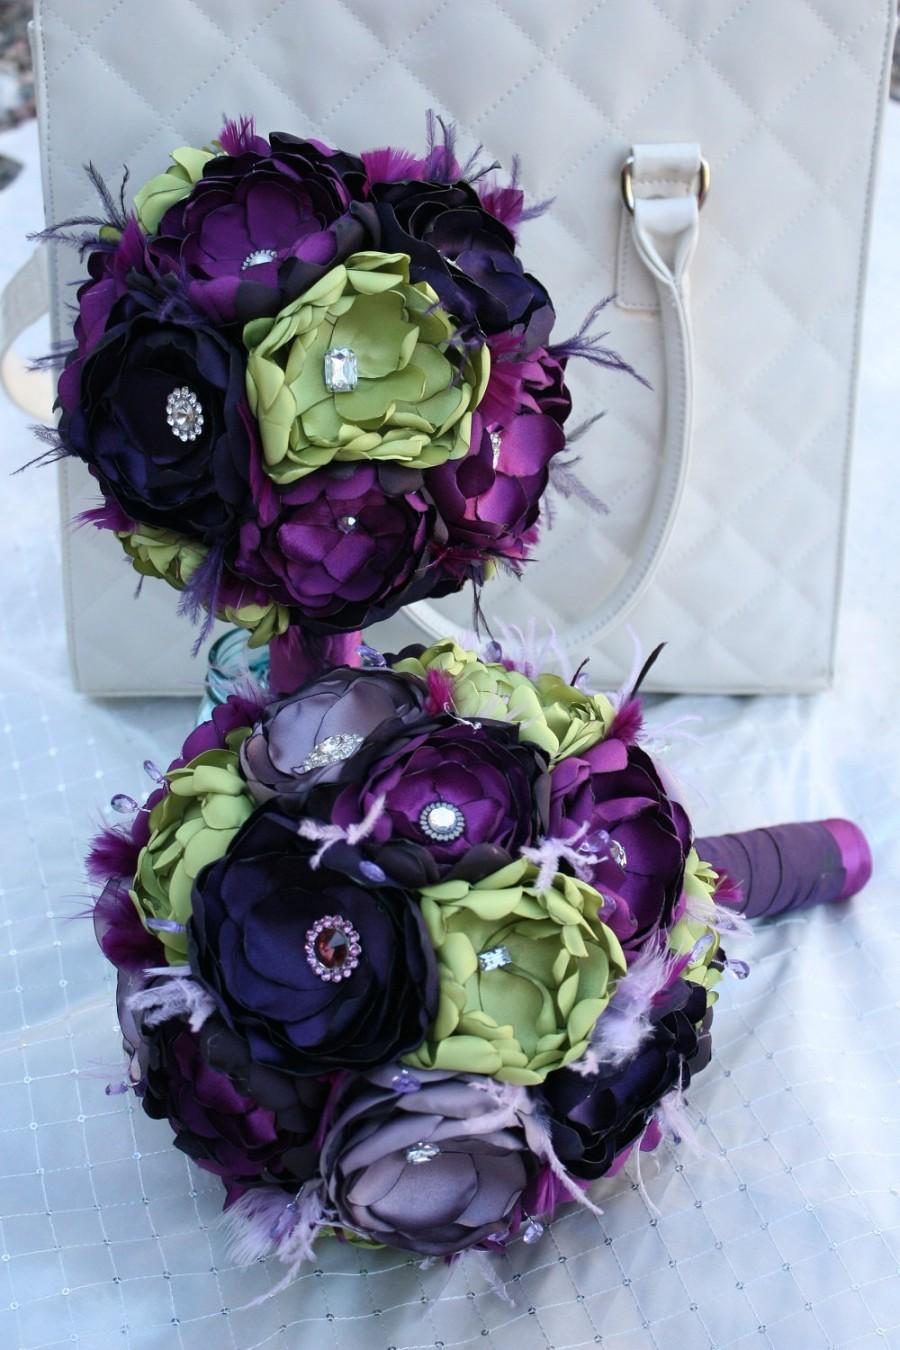 Wedding - Handmade Fabric Flower Wedding Package in Purples and Green - Bridal bouquet - Boutonnieres - Corsages - Brooch bouquet -